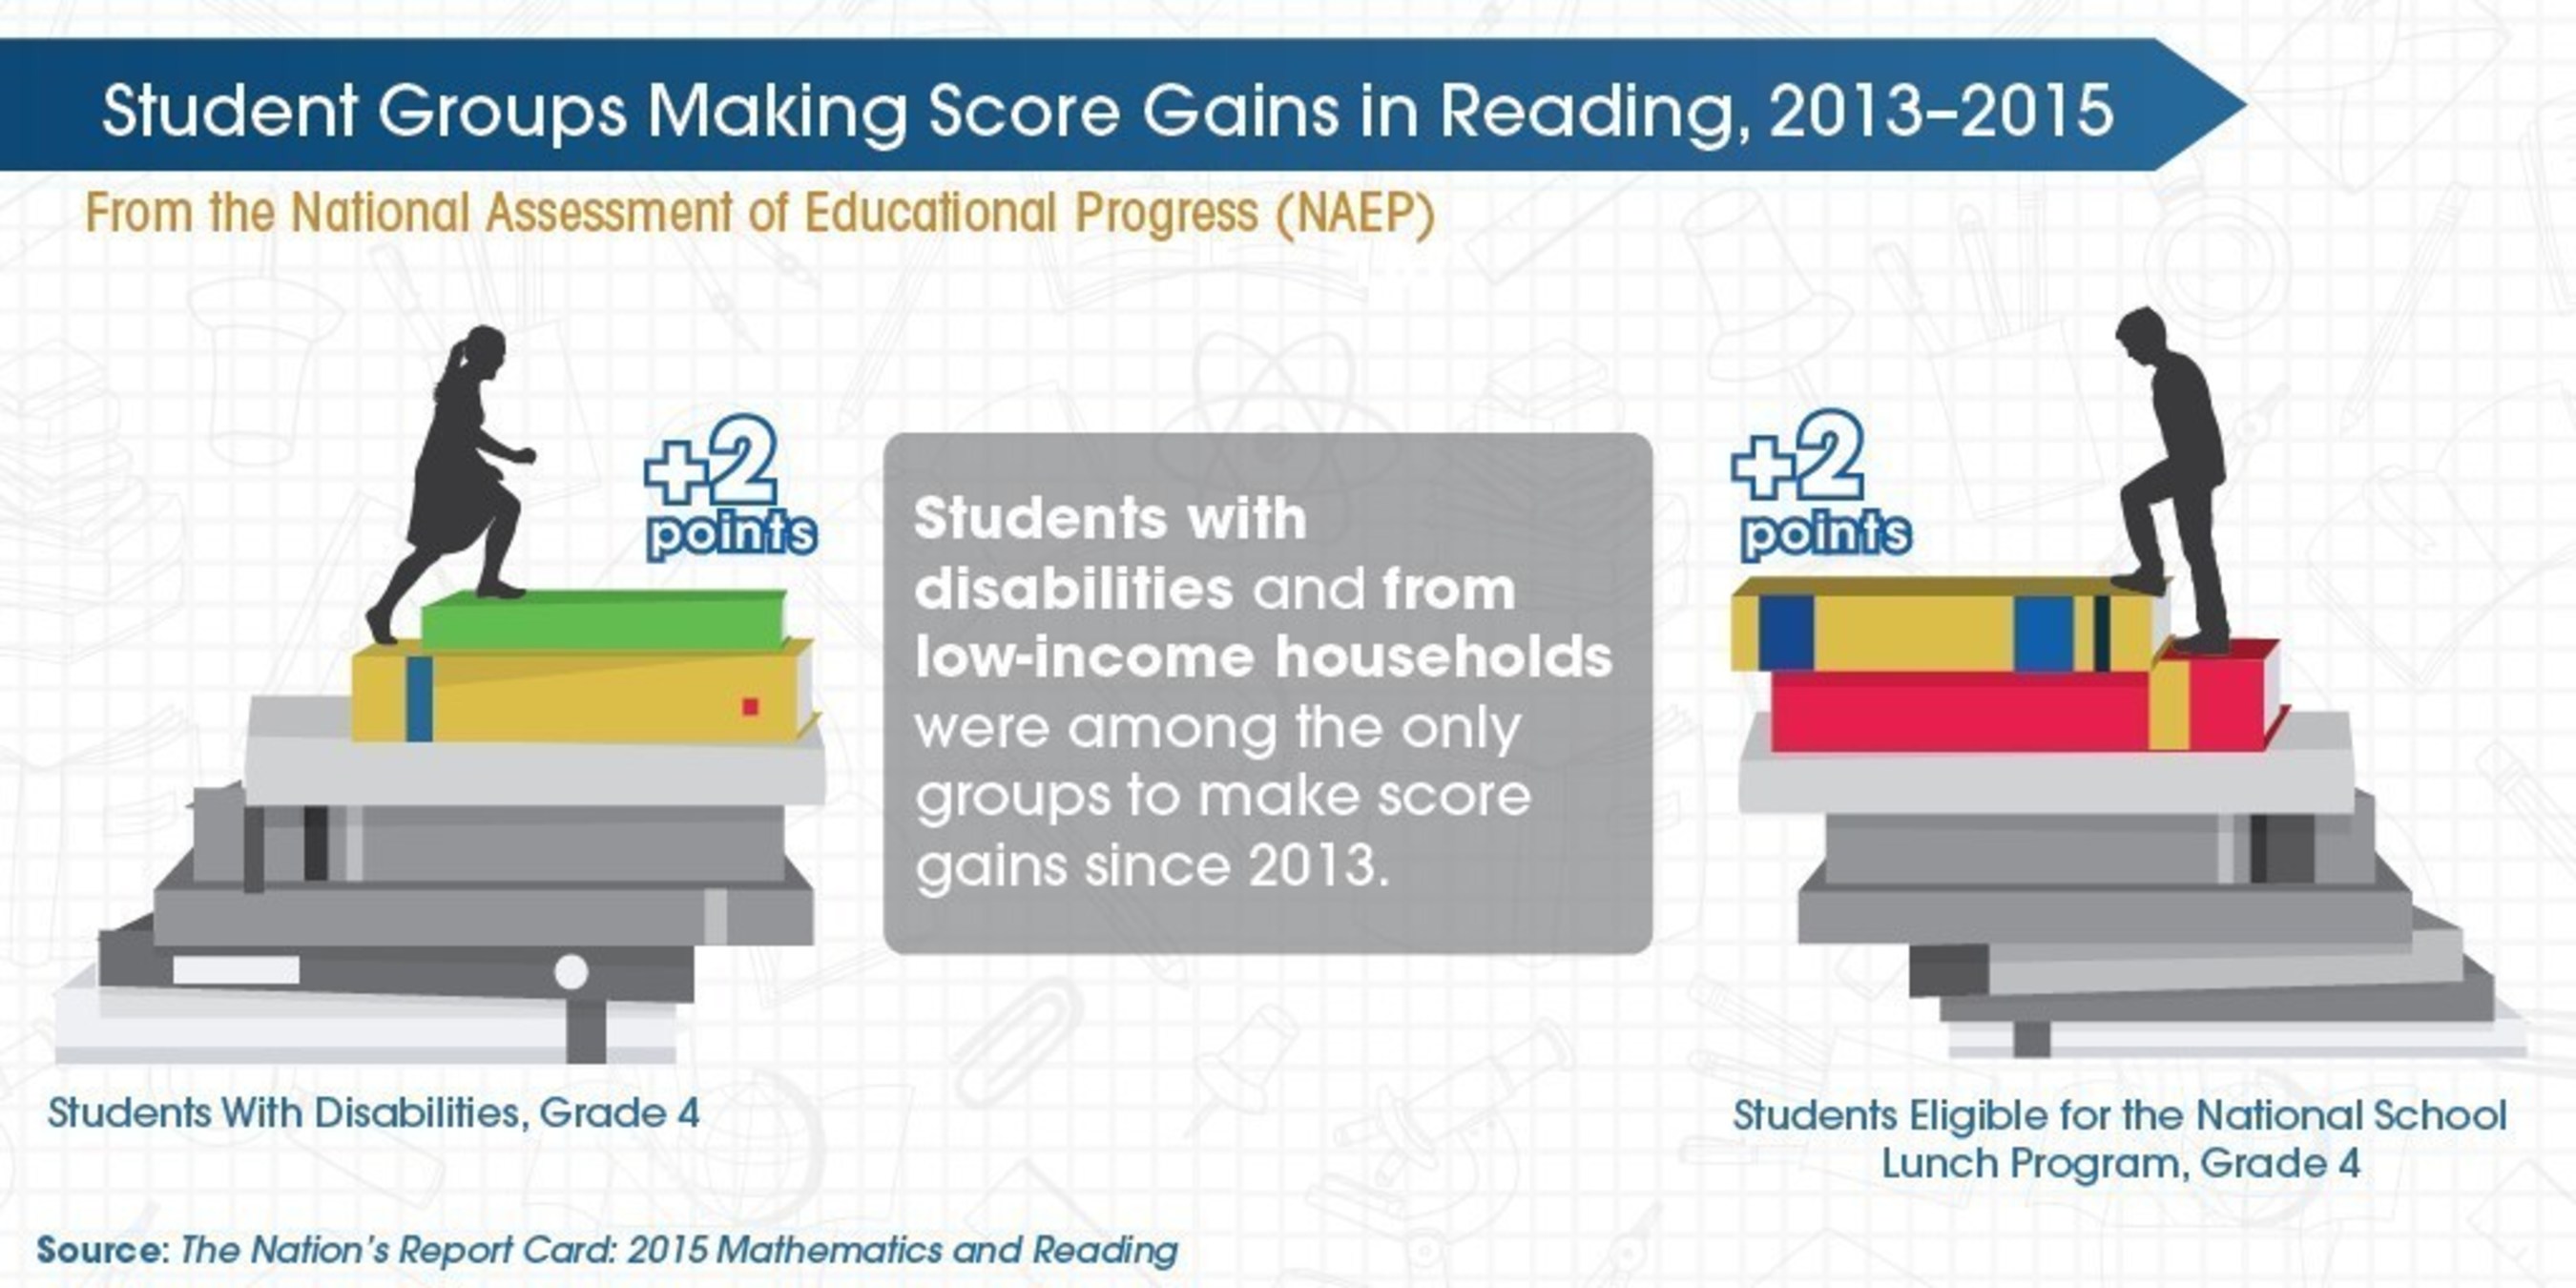 Students with disabilities and from low-income households were among the only groups to make score gains since 2013.